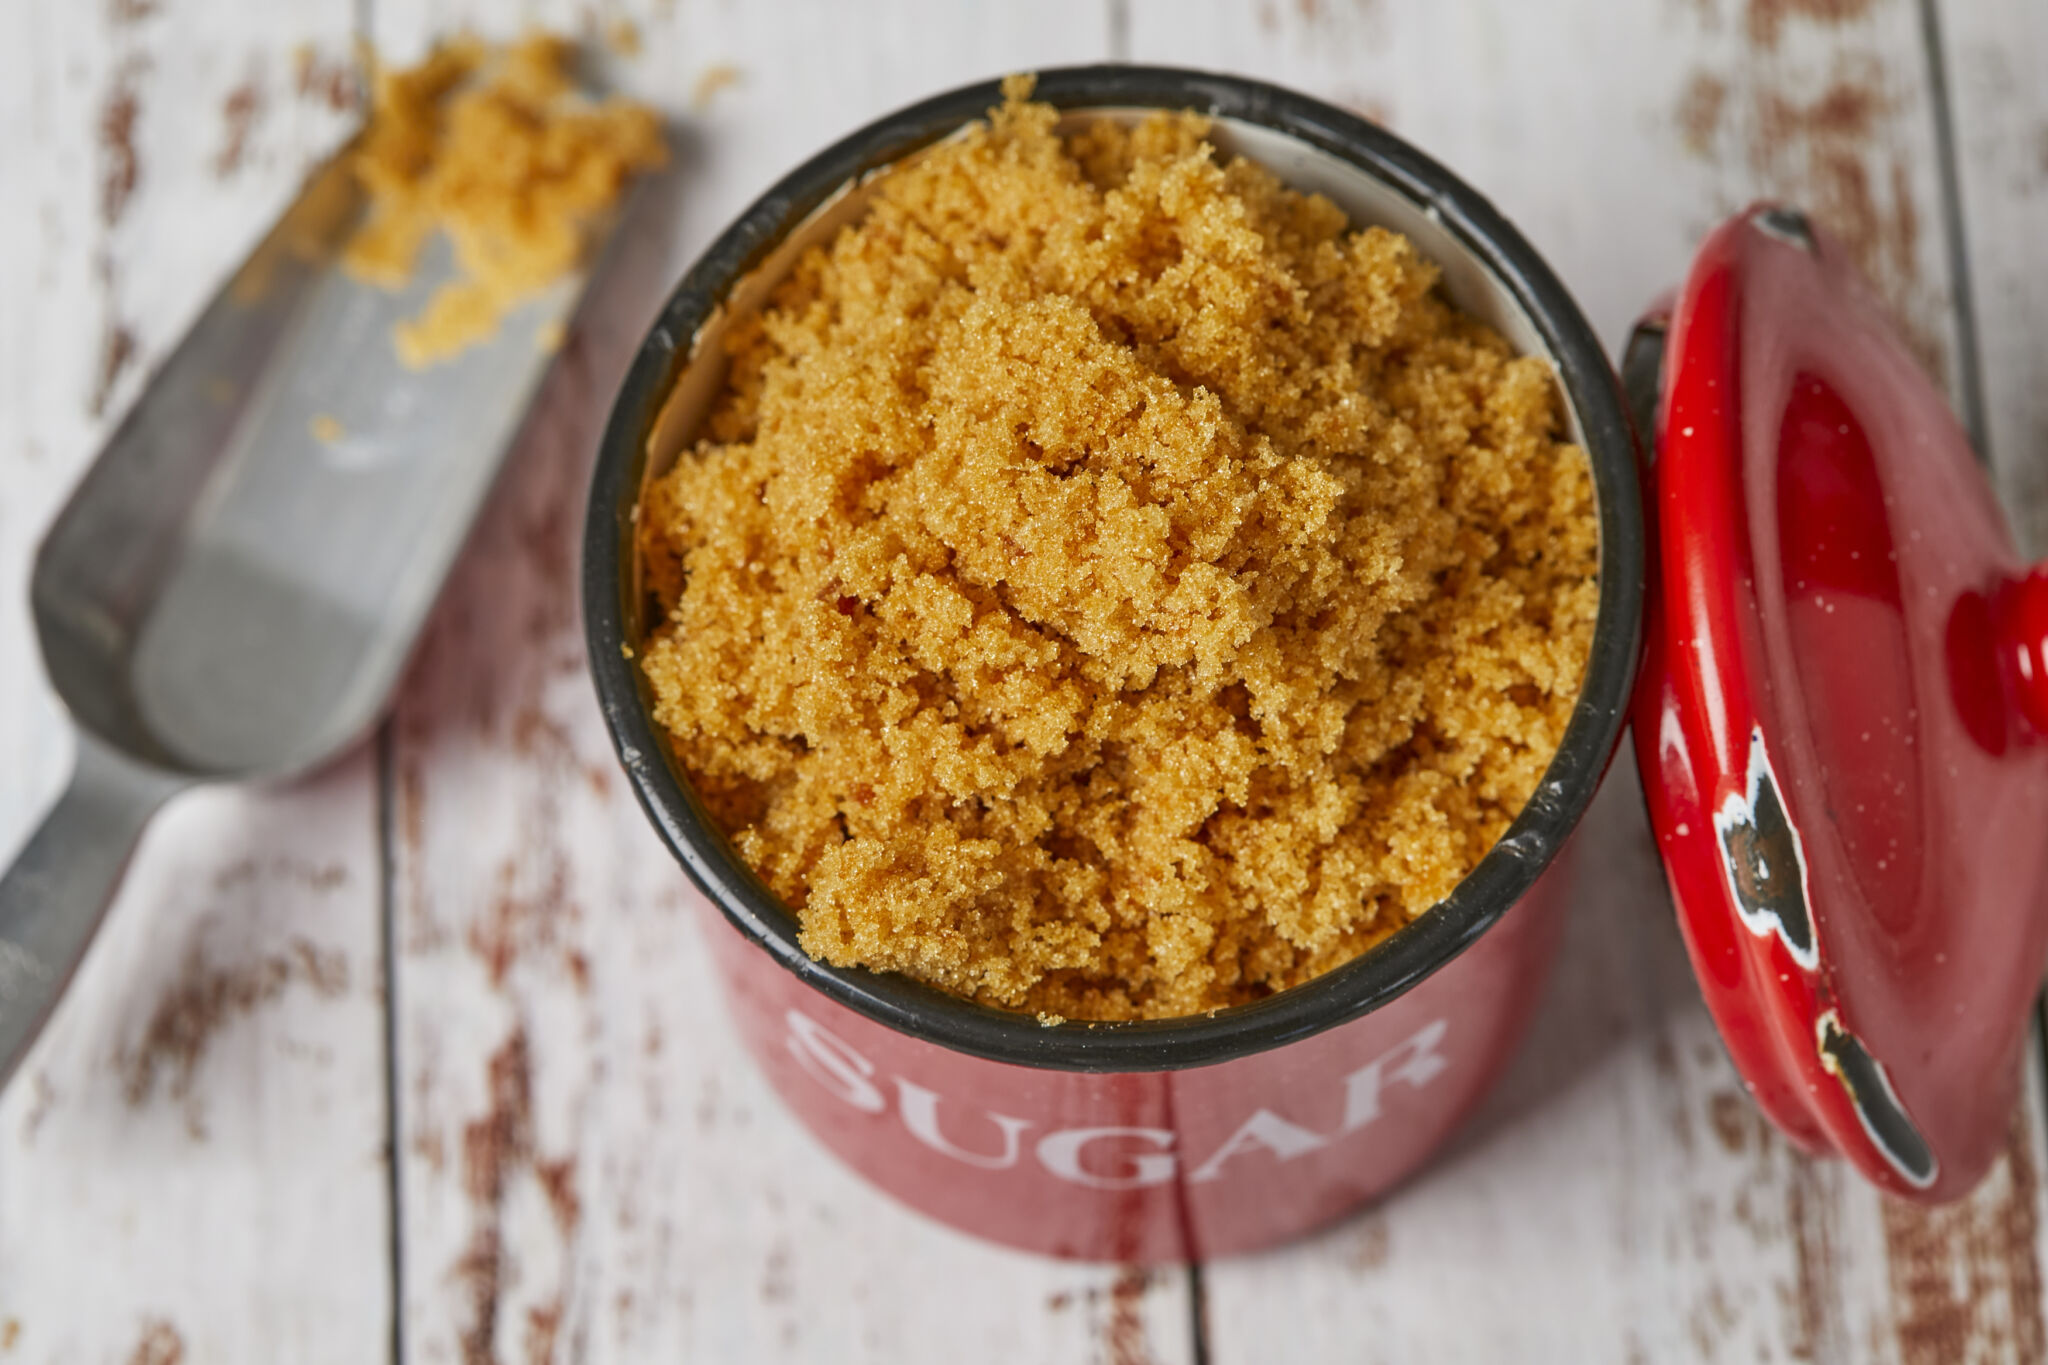 Homemade Brown Sugar is golden brown and moist, stored in a red enamel mug with a metal scoop on the side in the top left corner.